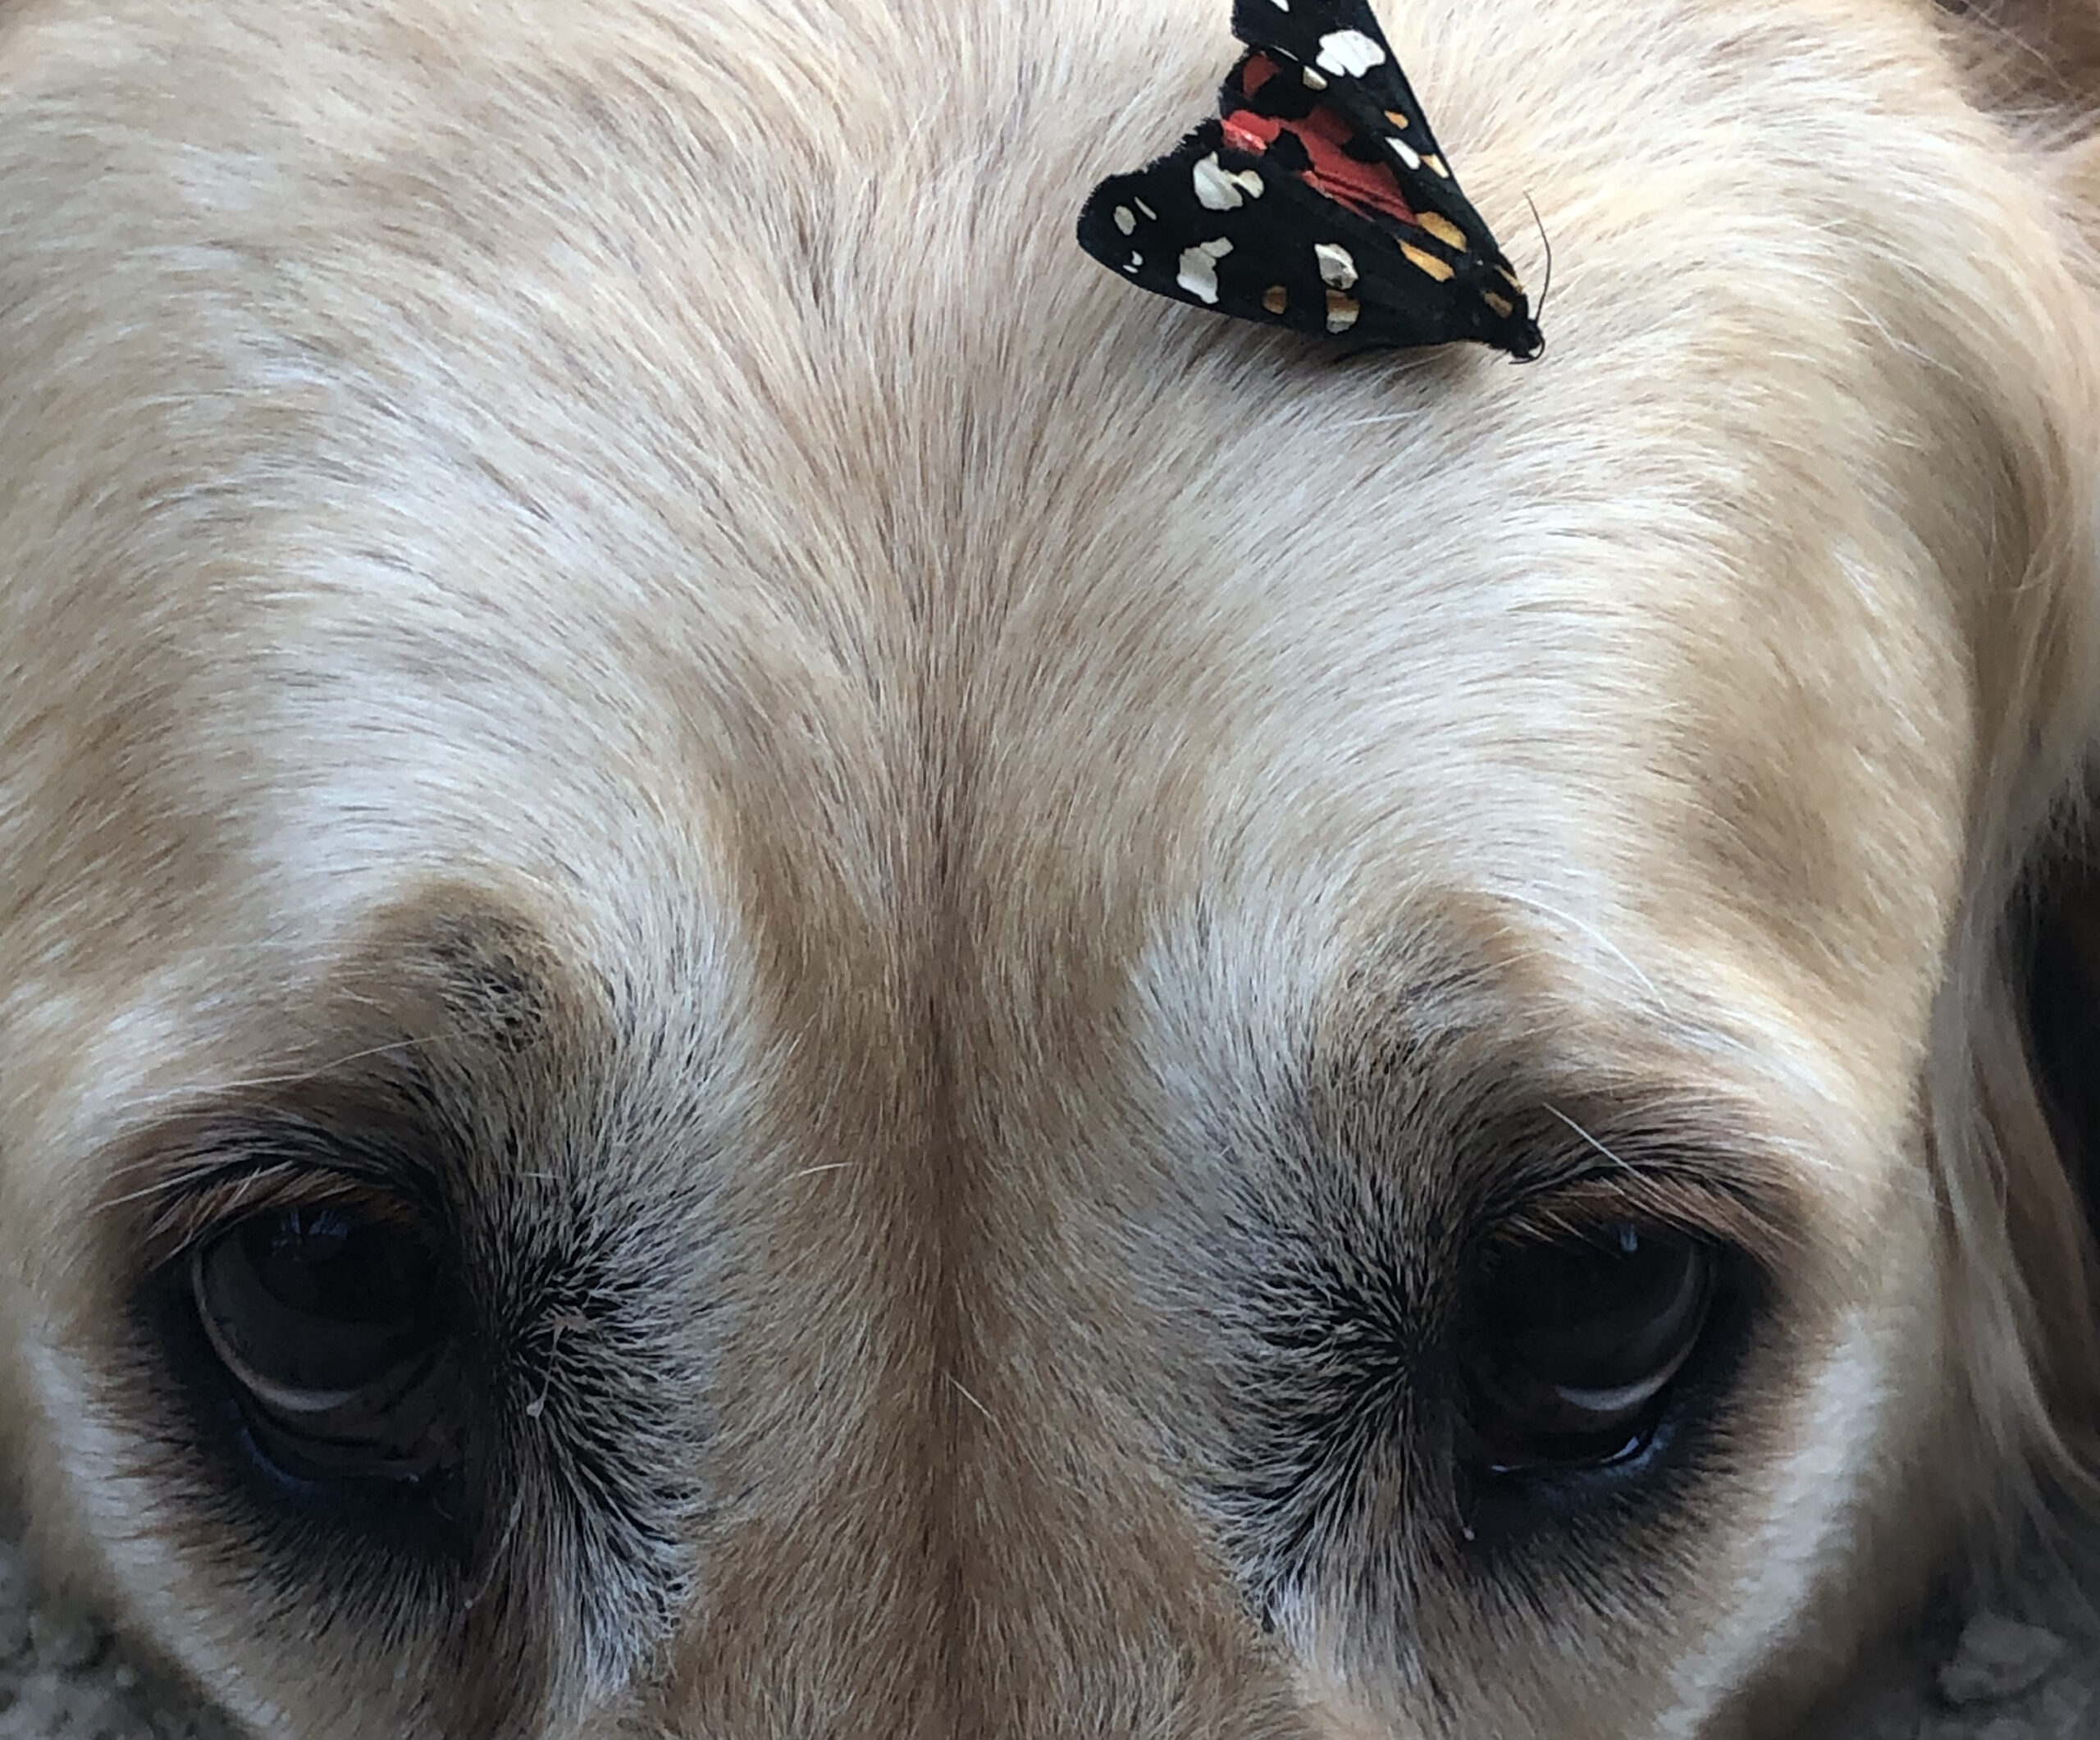 Golden retriever dog close up eyes with butterfly perched on head